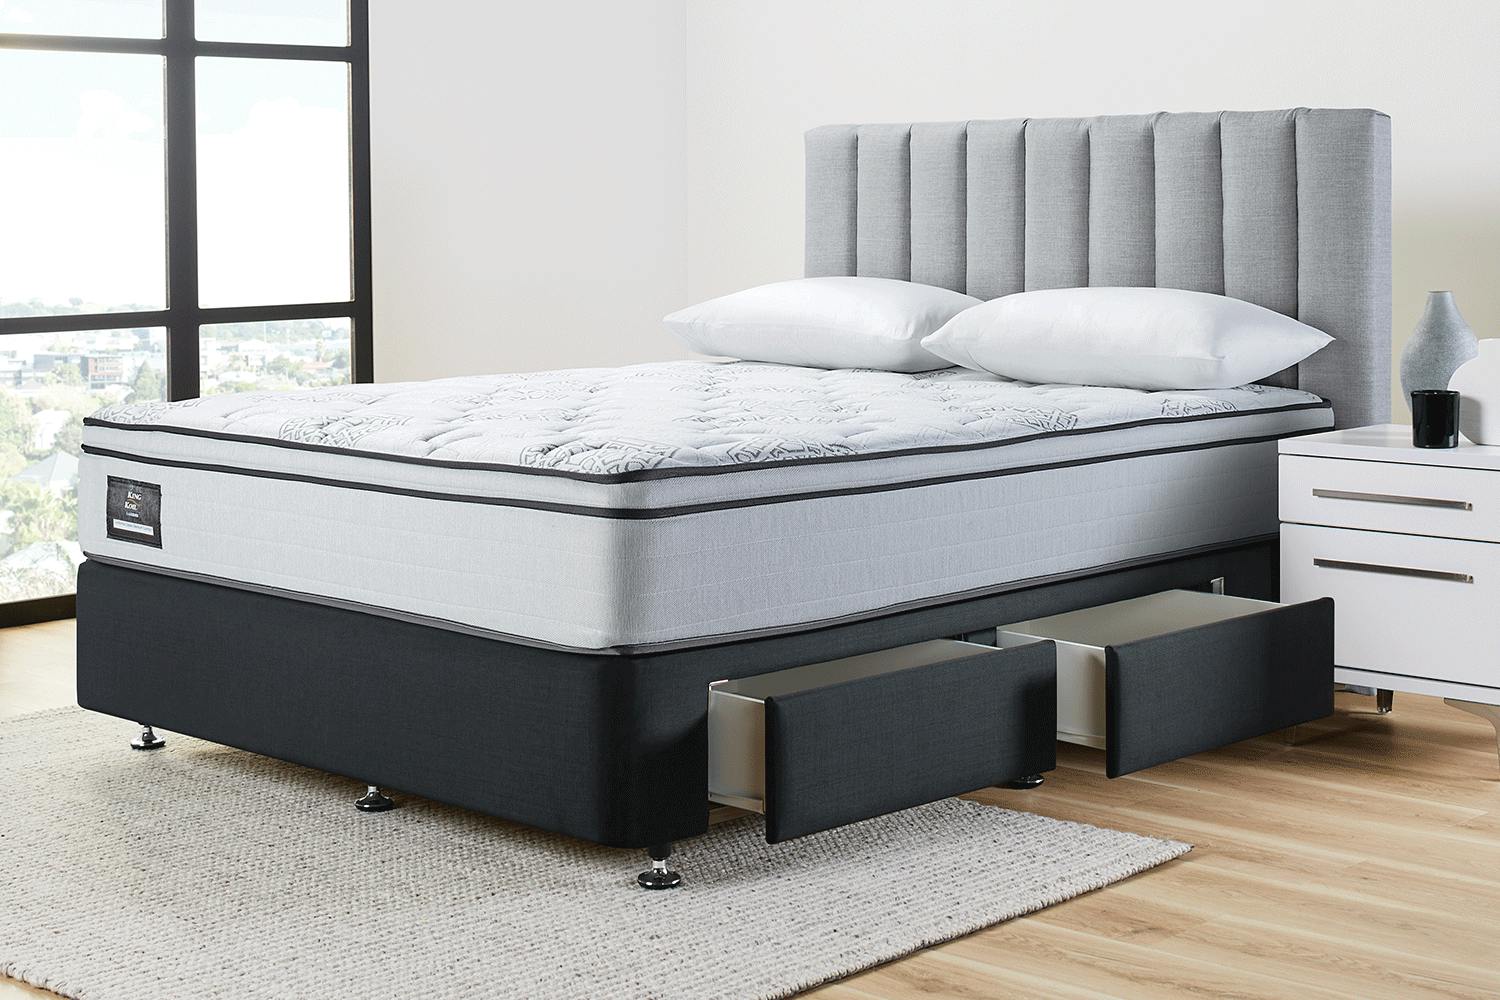 Conforma Classic Medium King Bed With Drawer Base by King Koil